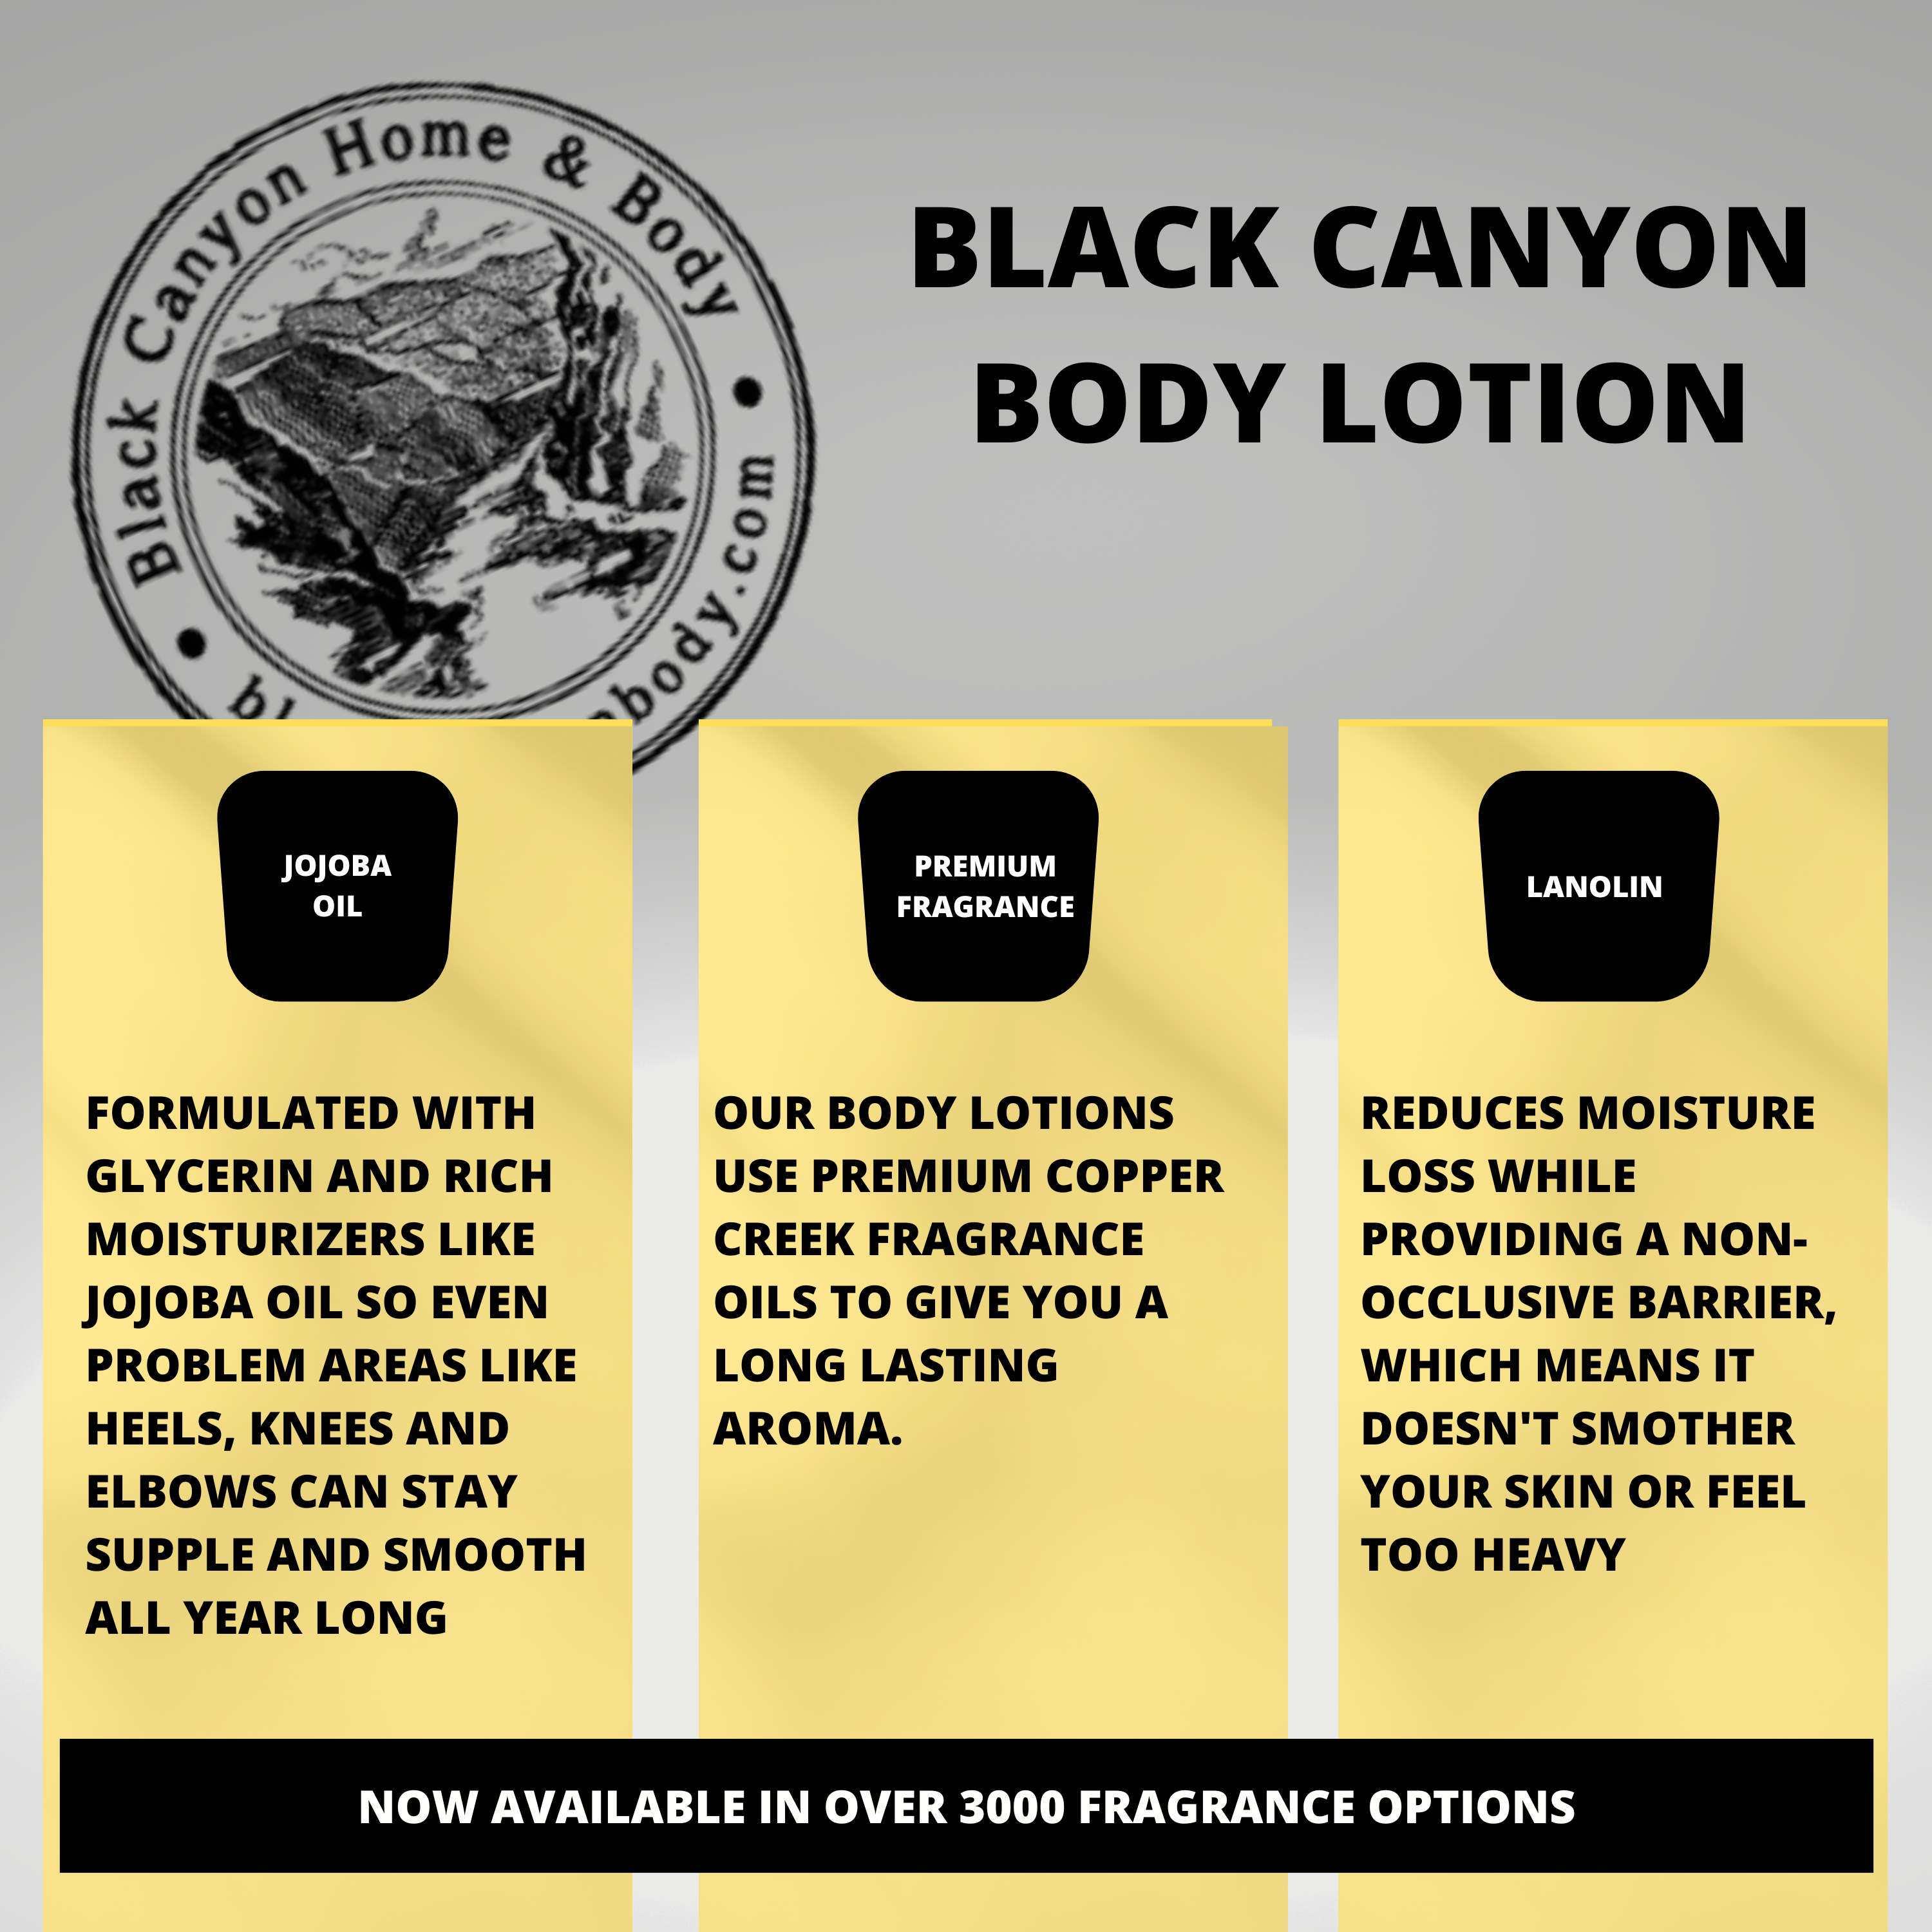 Black Canyon Dark Chocolate Scented Luxury Body Lotion with Lanolin and Jojoba Oil